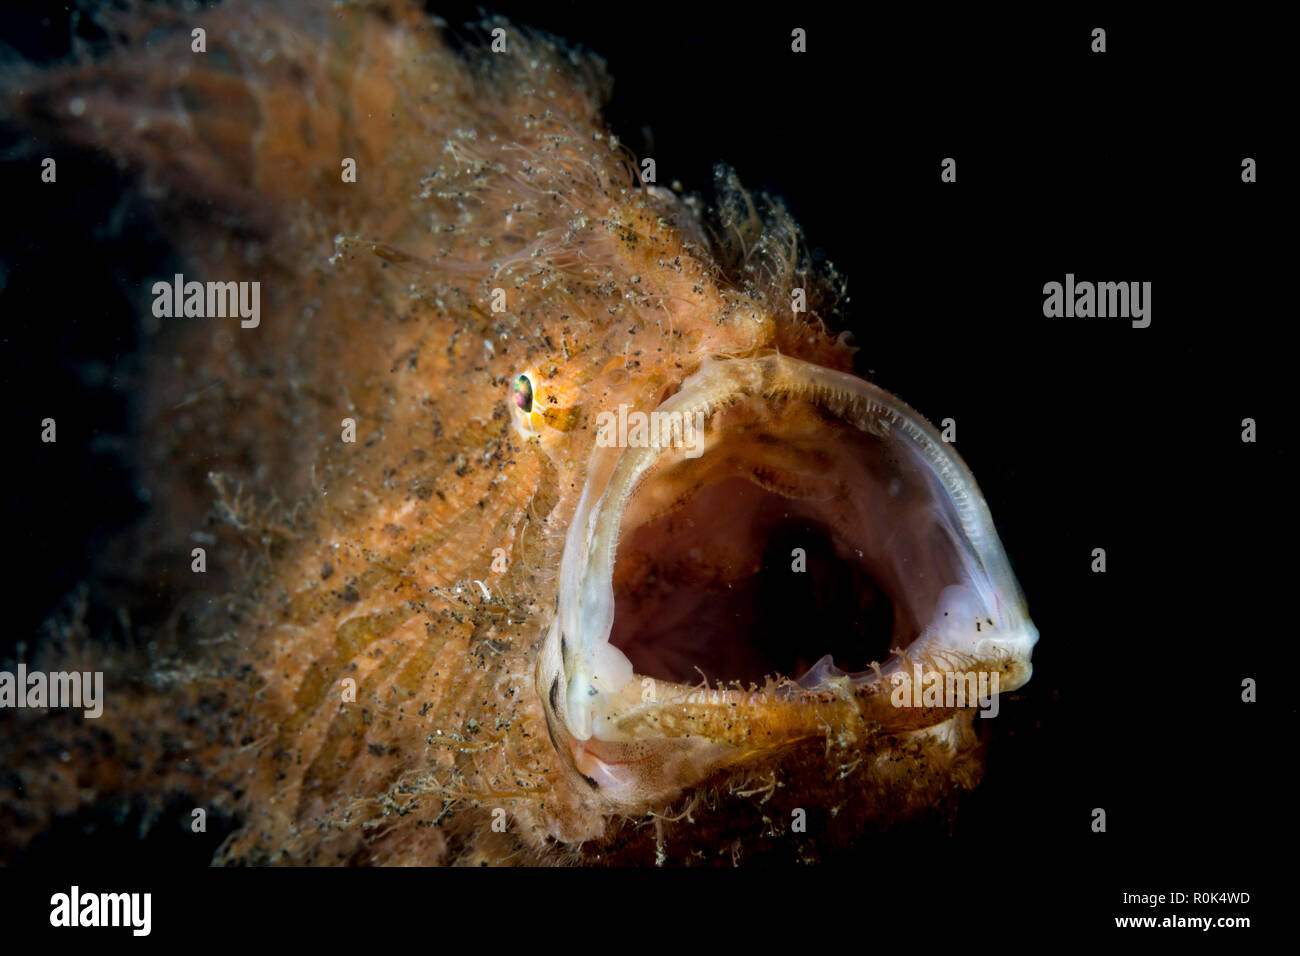 A hairy frogfish shows the full extention of its mouth in Lembeh, Indonesia. Stock Photo